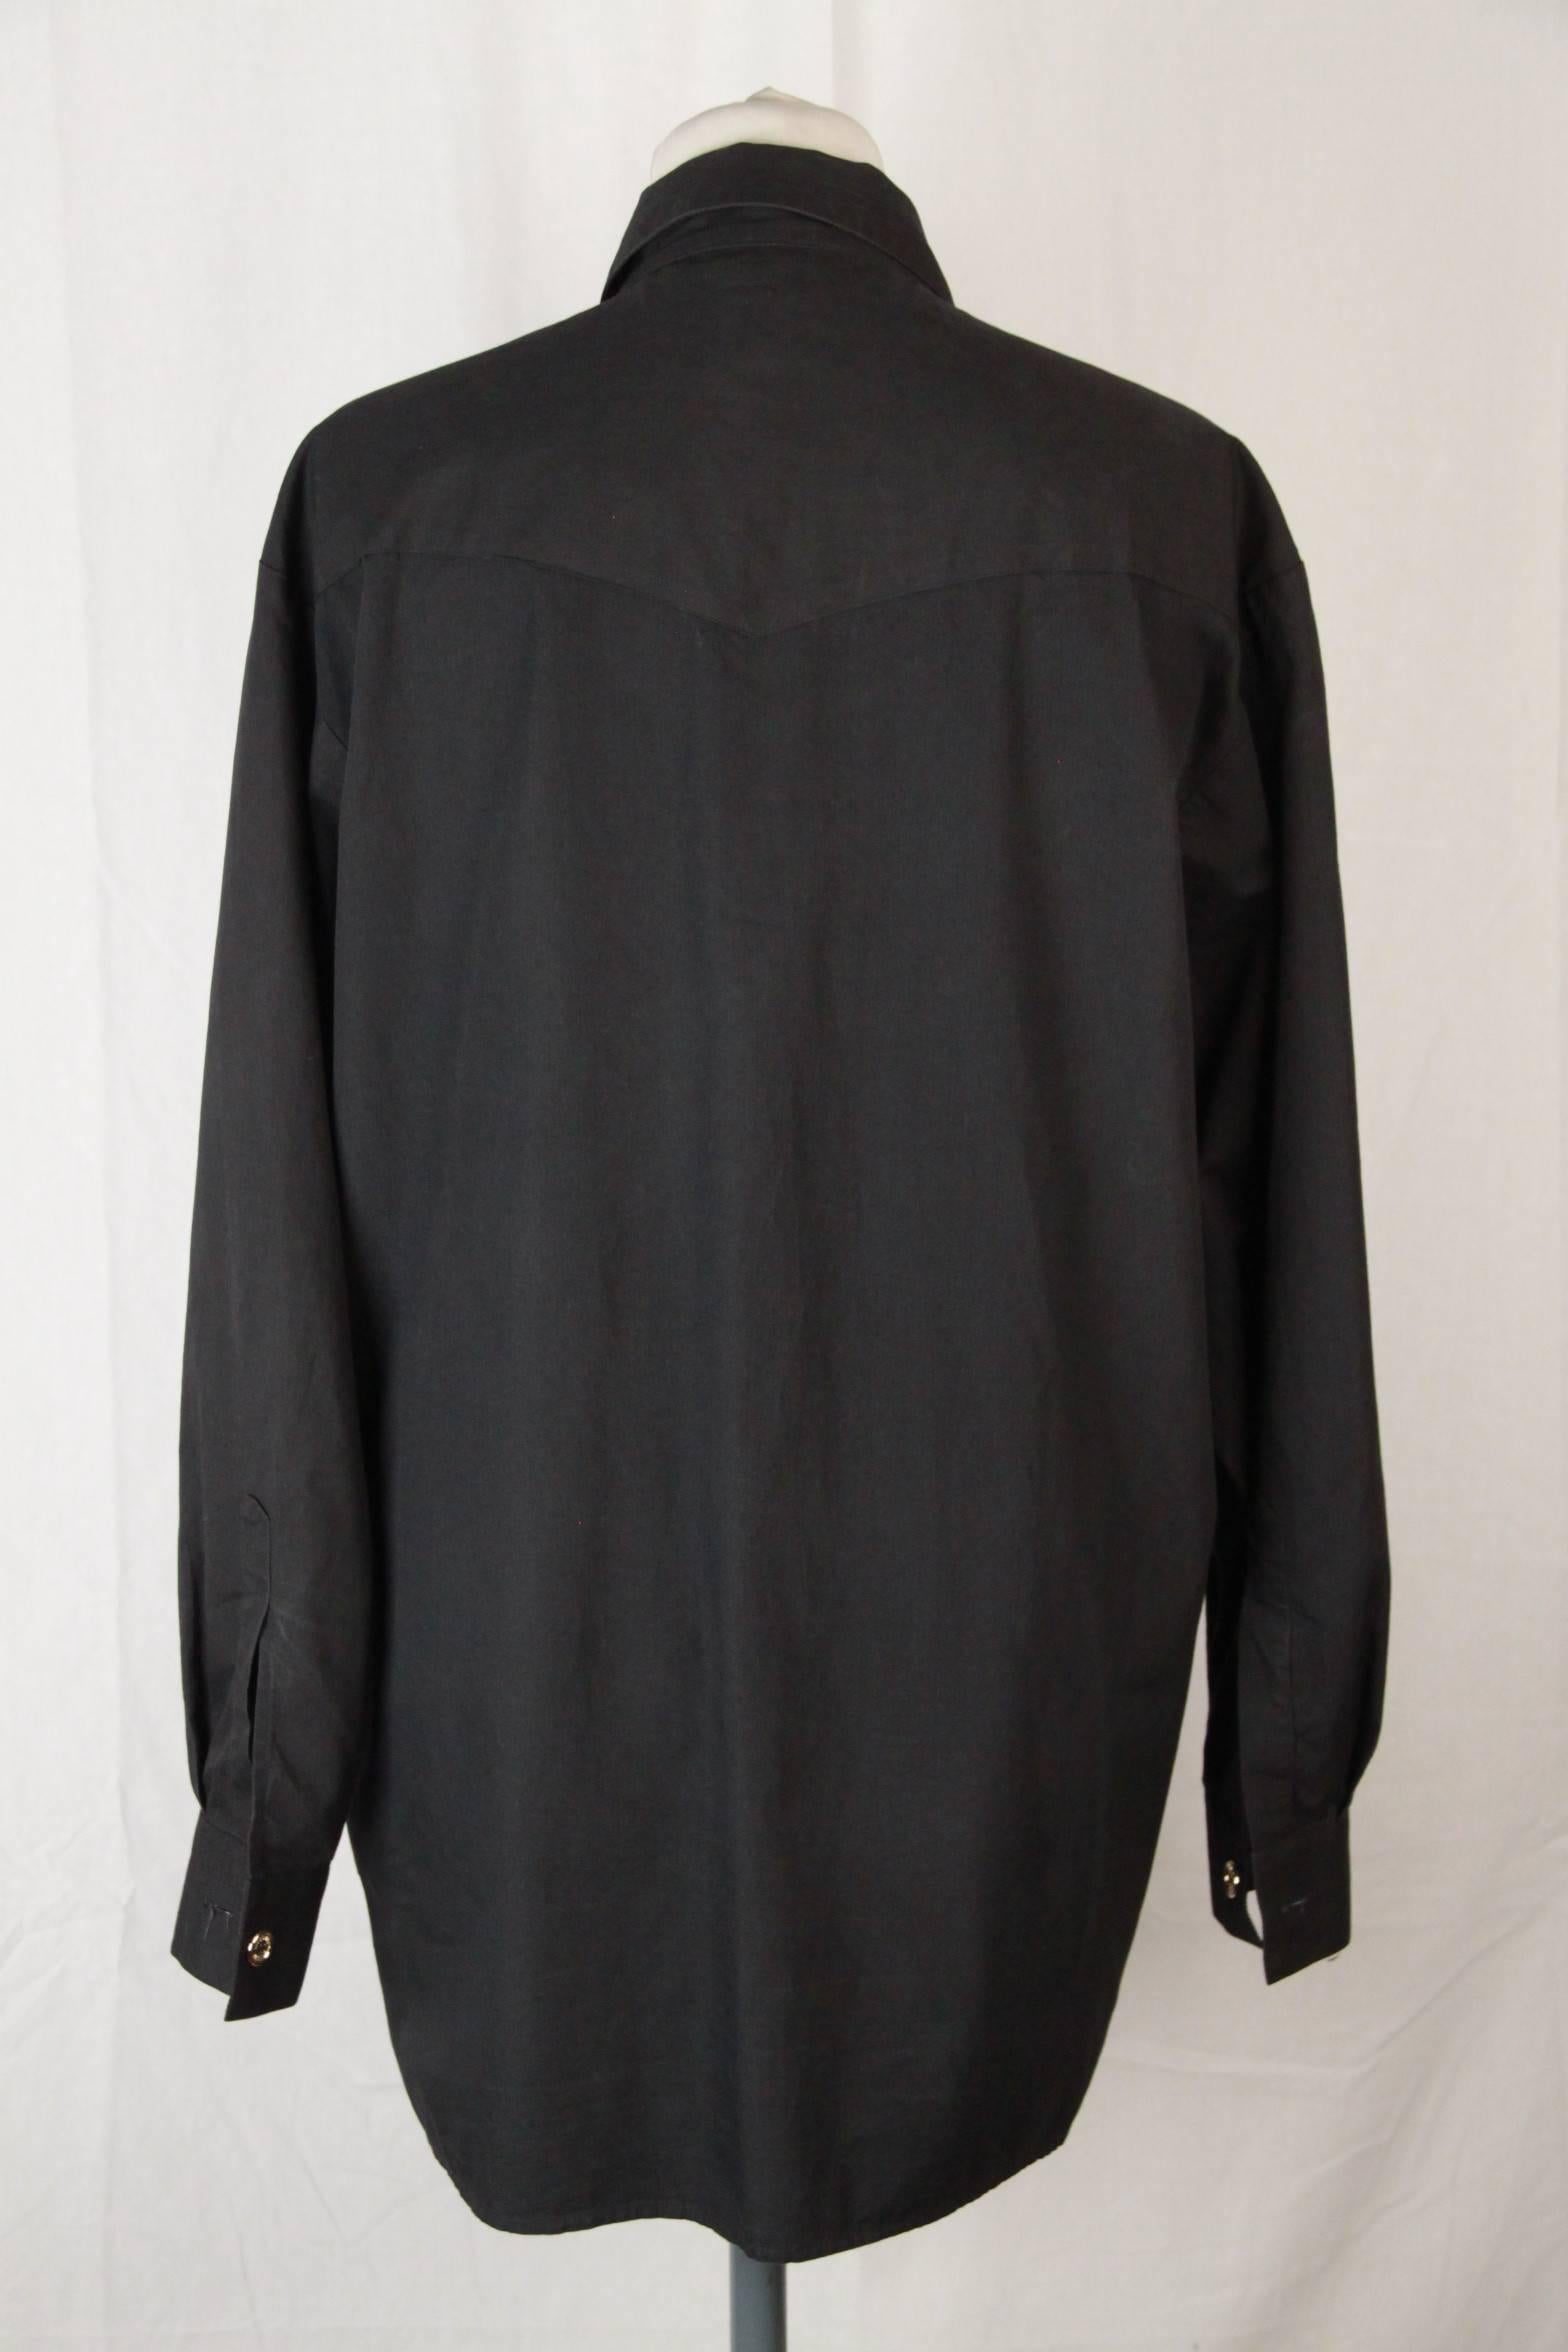 Moschino Jeans Vintage Black Cotton Ruffled Long Sleeve Shirt Size M 3